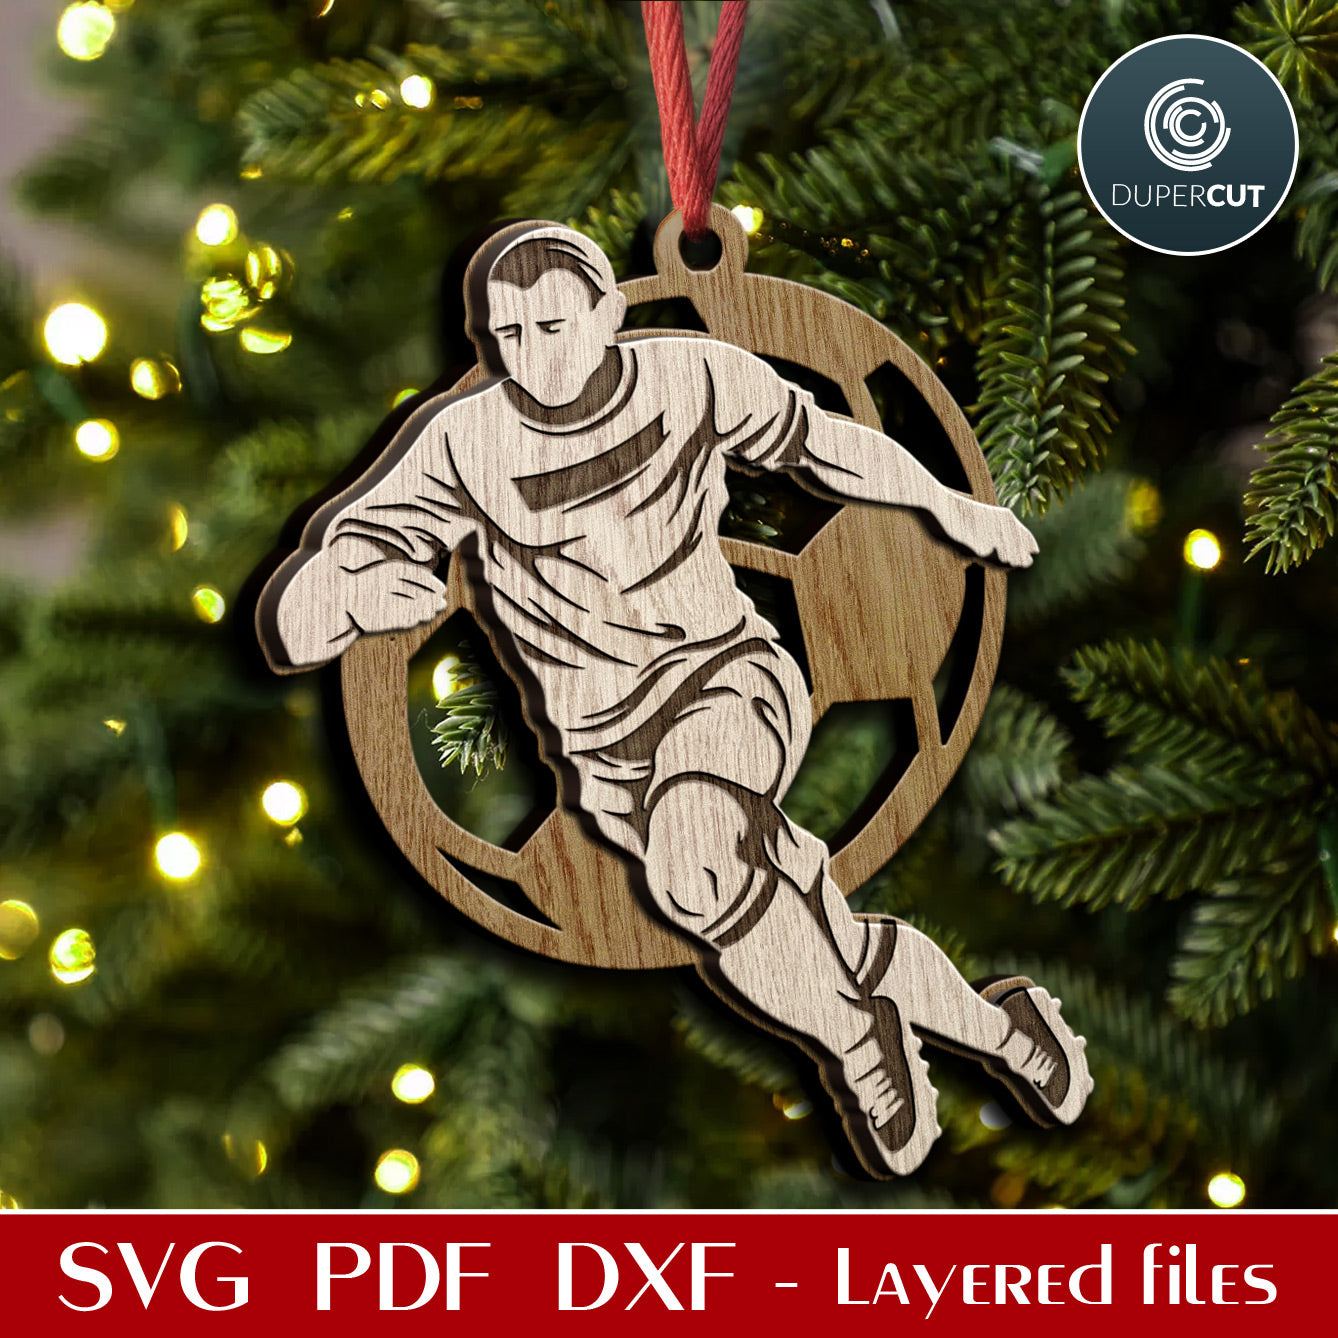 Soccer / football player sports Christmas ornament, SVG layered file template for laser machines Glowforge, Cricut, X-tool, CNC plasma by www.DuperCut.com